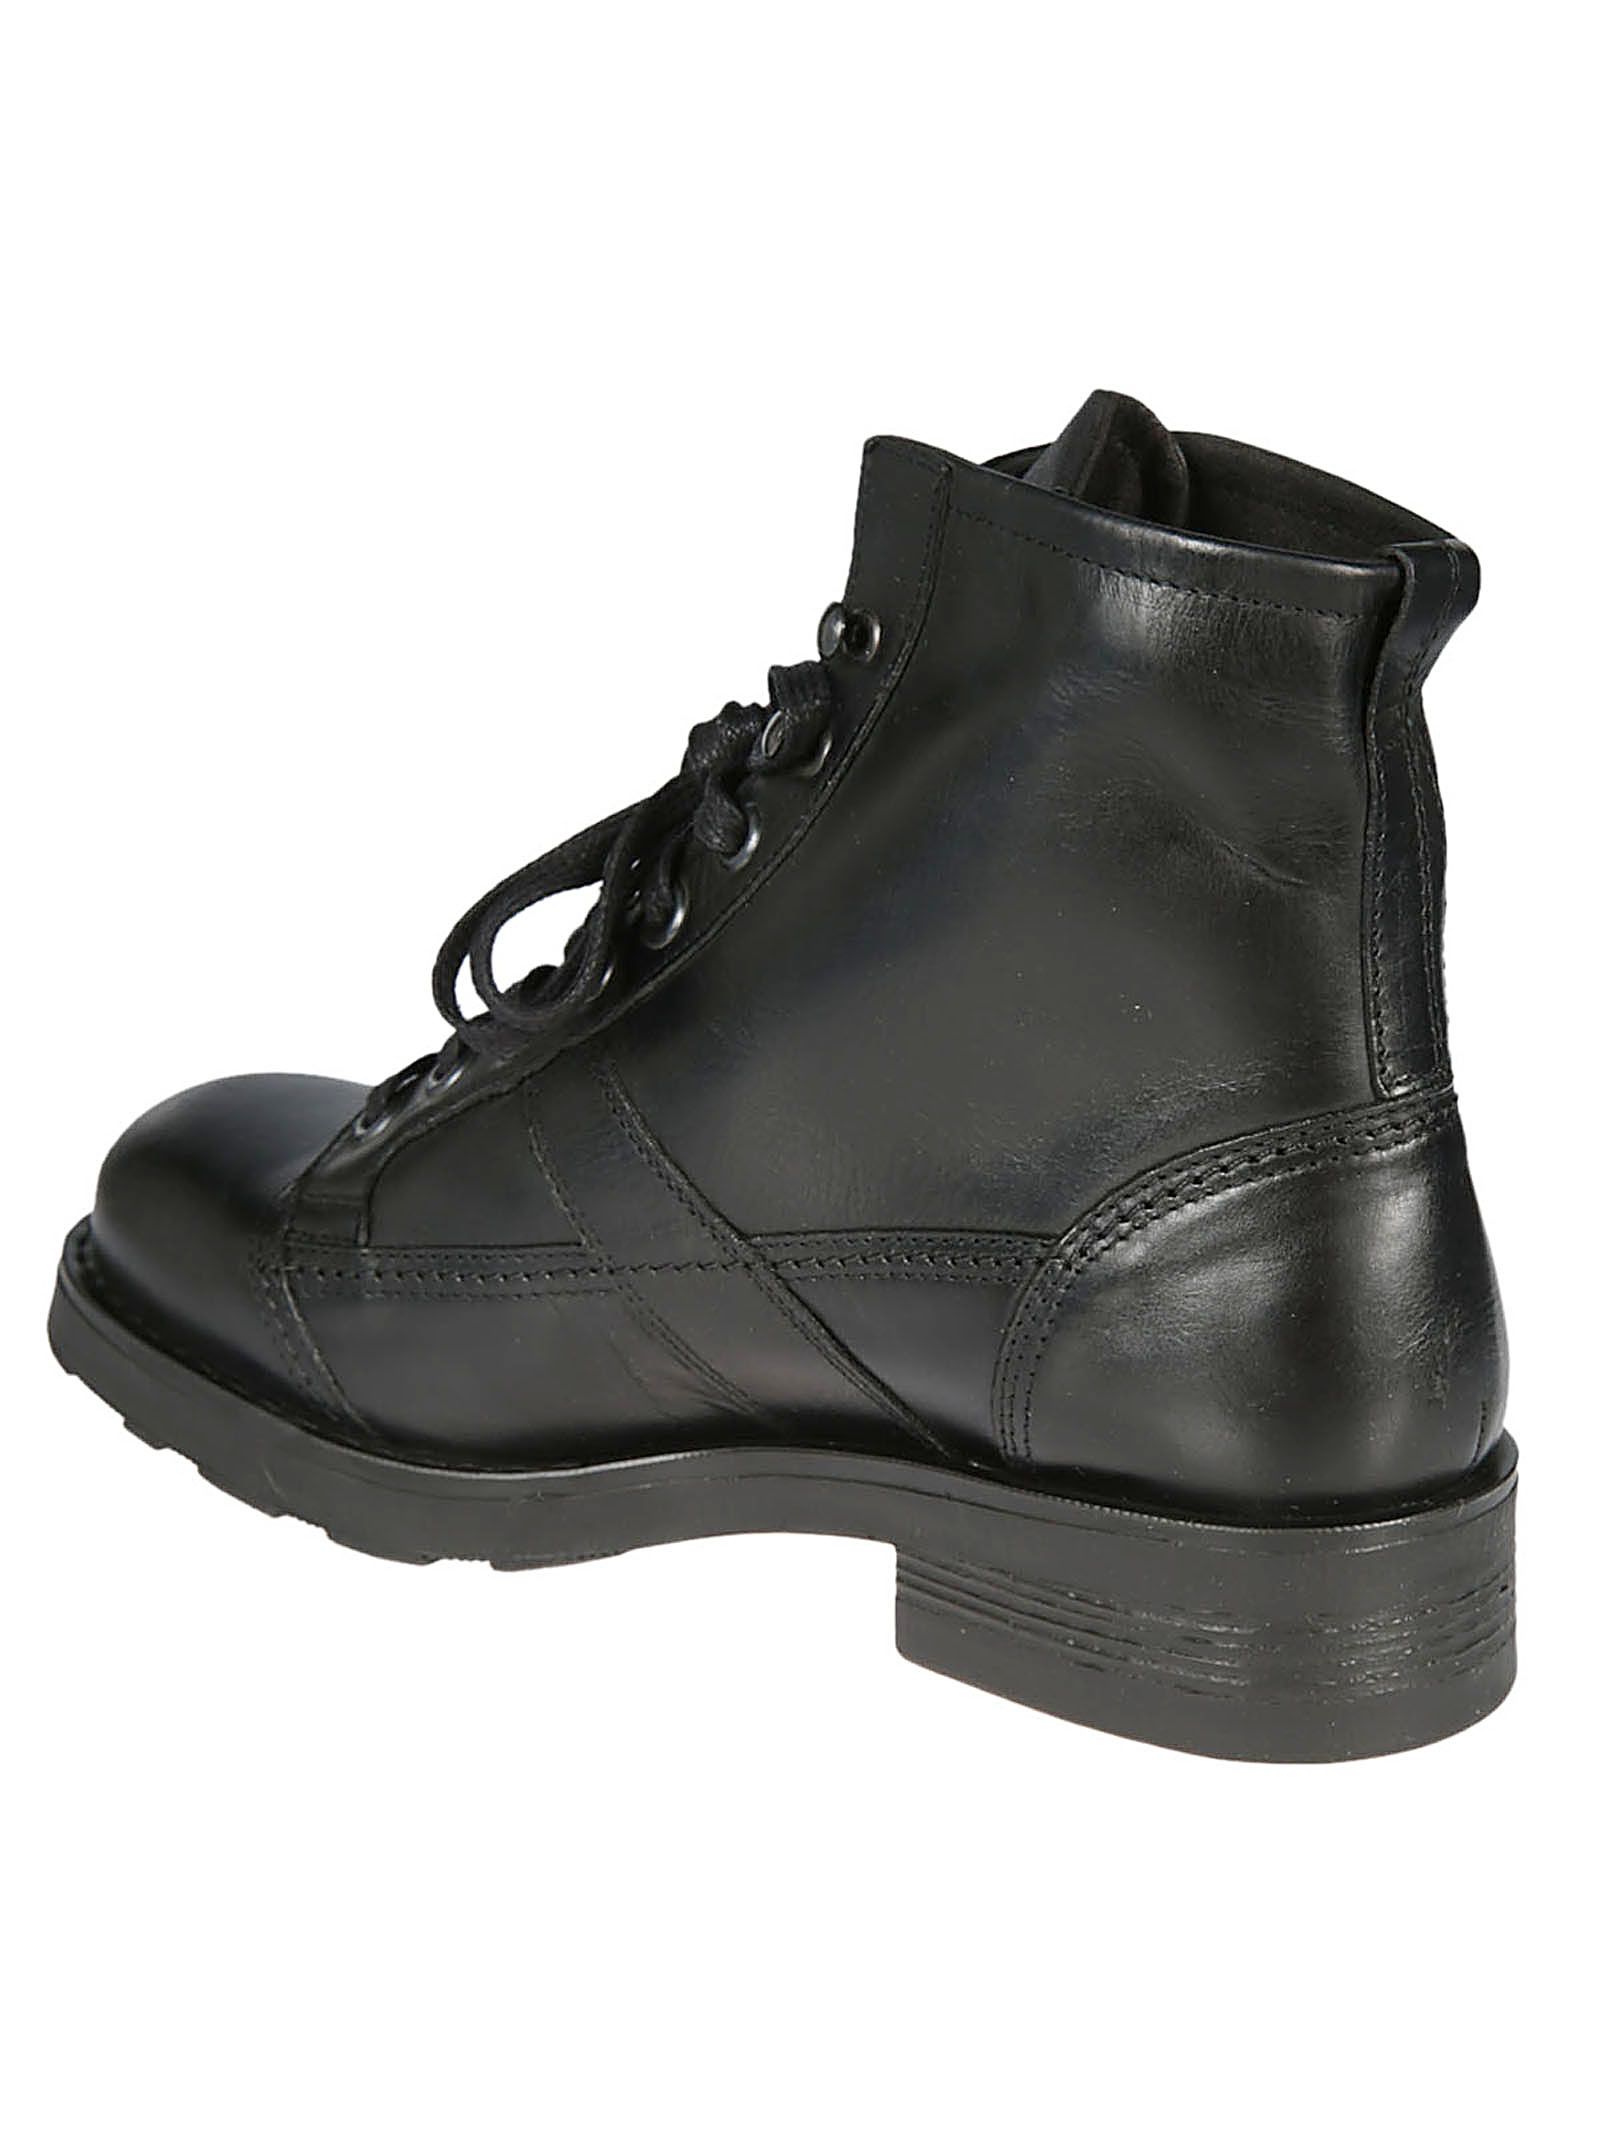 italist | Best price in the market for OXS Oxs John Men's Lace-up Boots ...